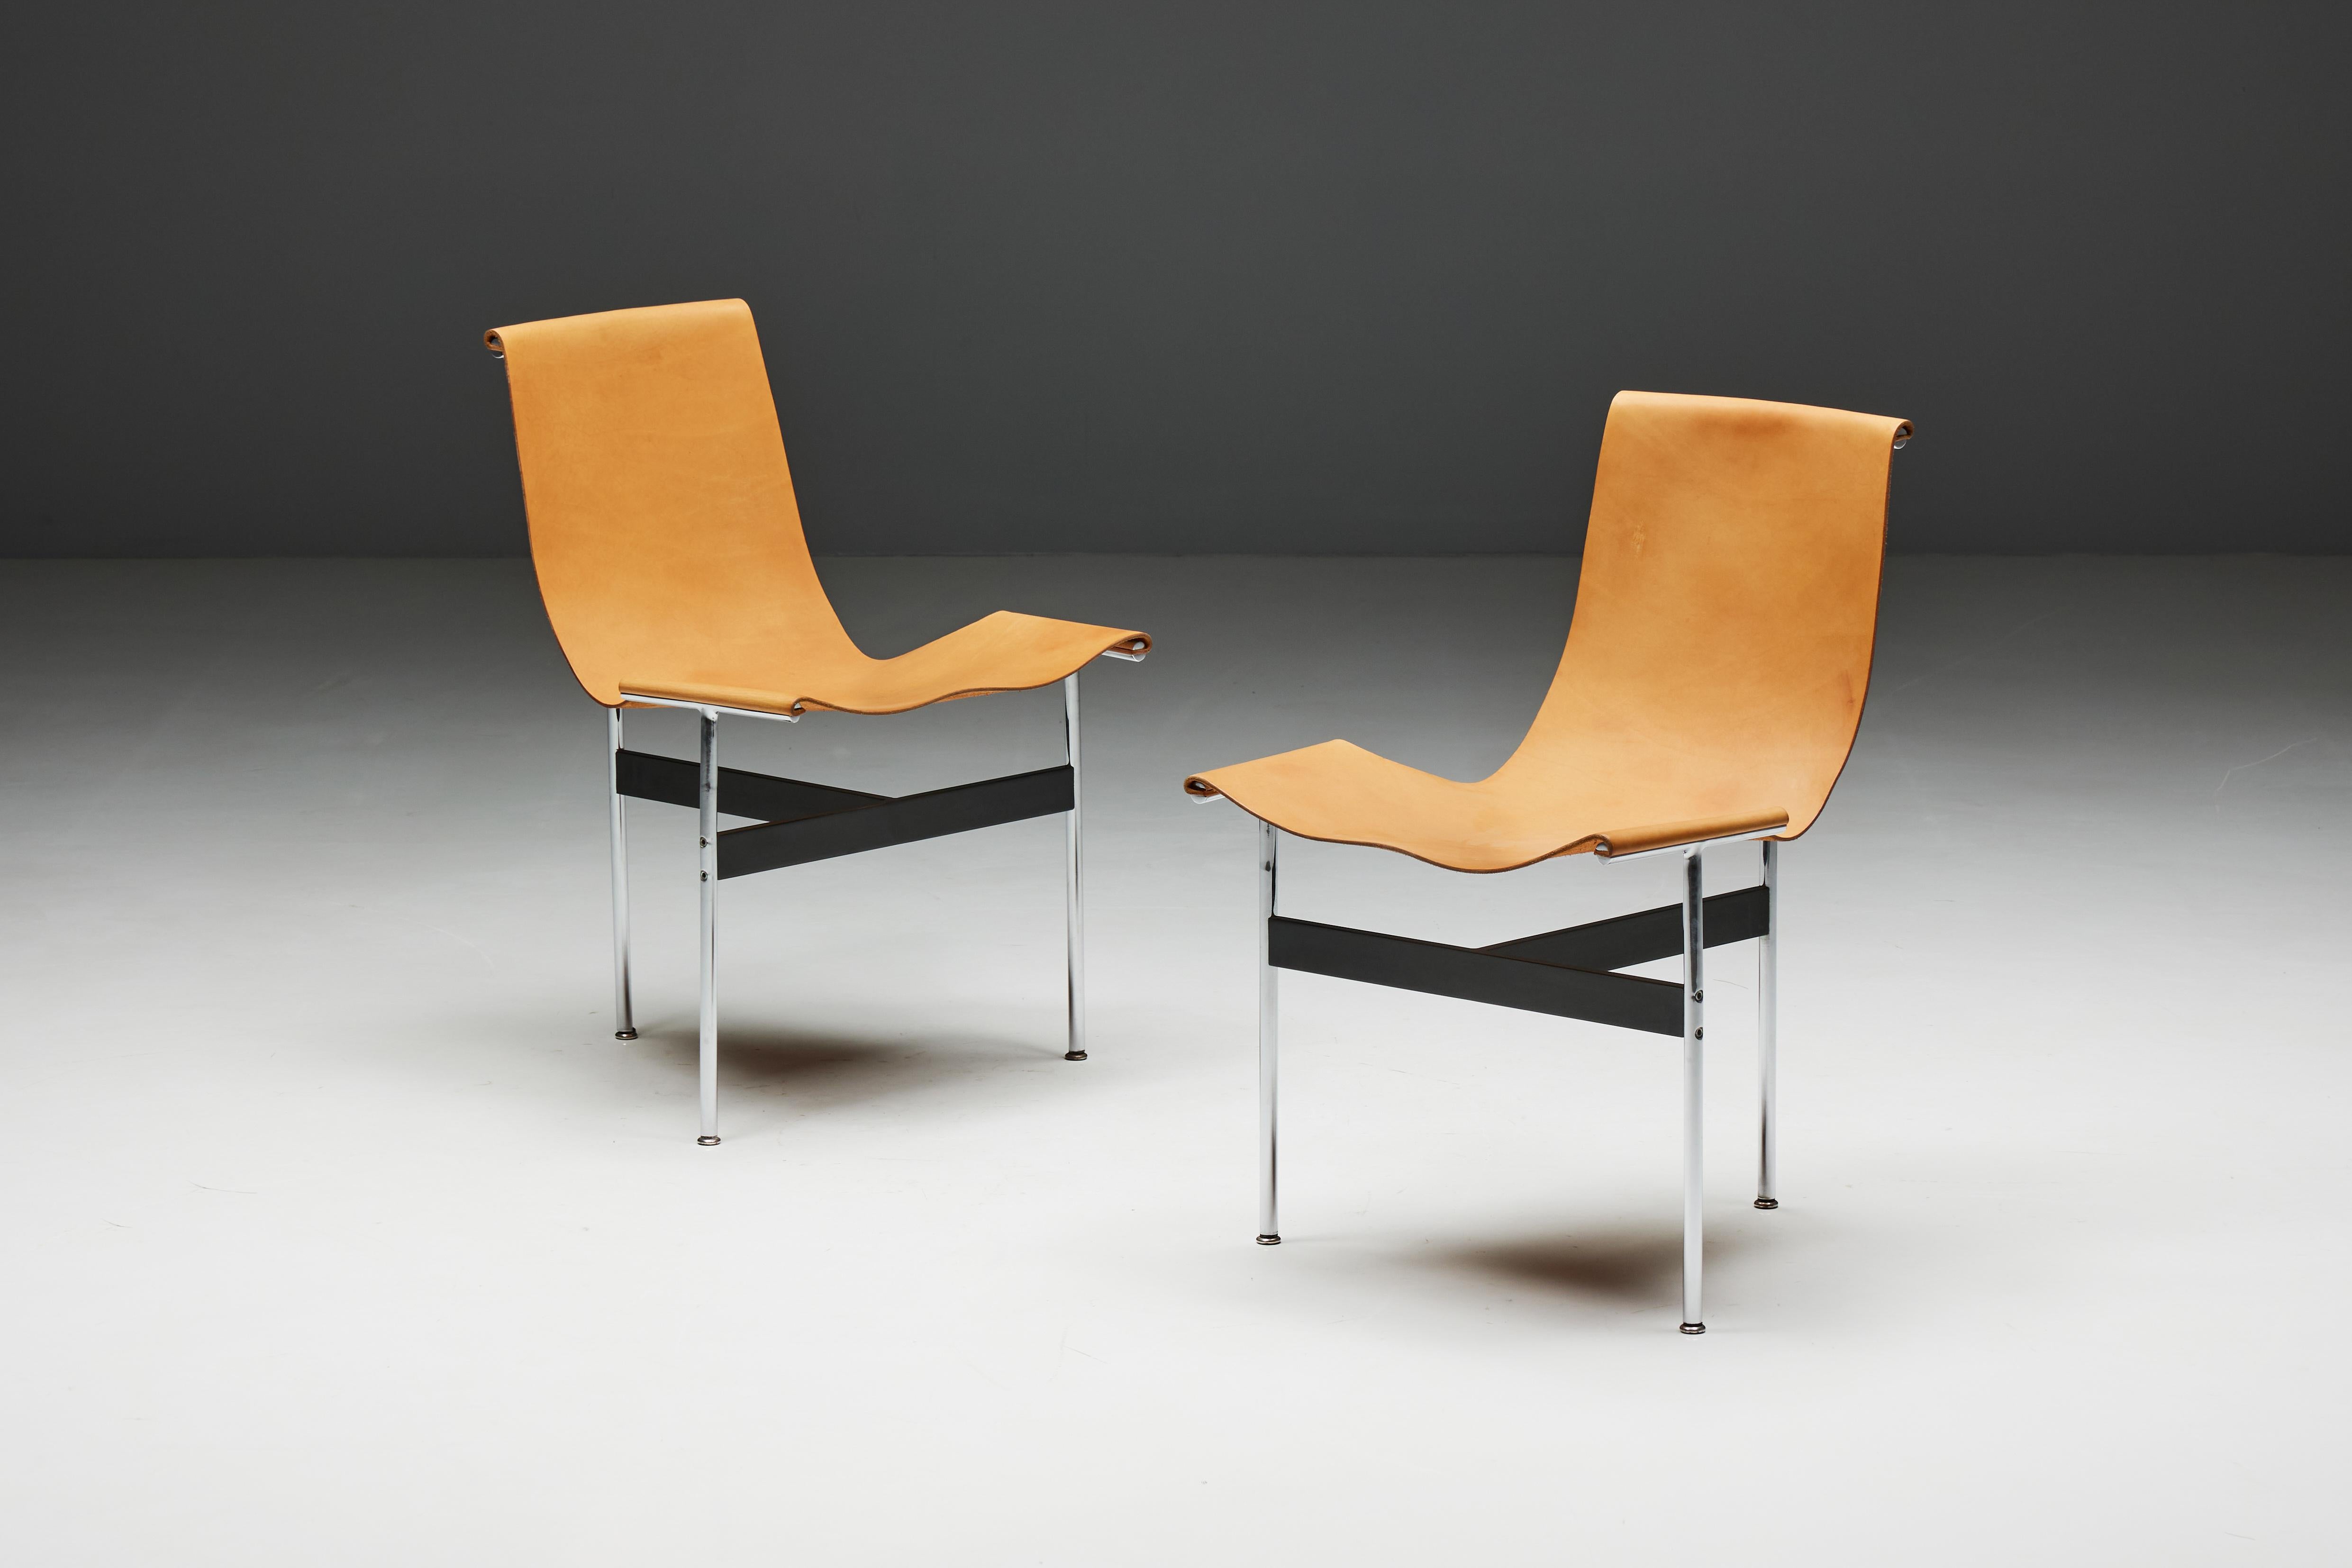 T-Chairs by Katavolos, Kelley & Littell for Laverne International, US, 1950s For Sale 1